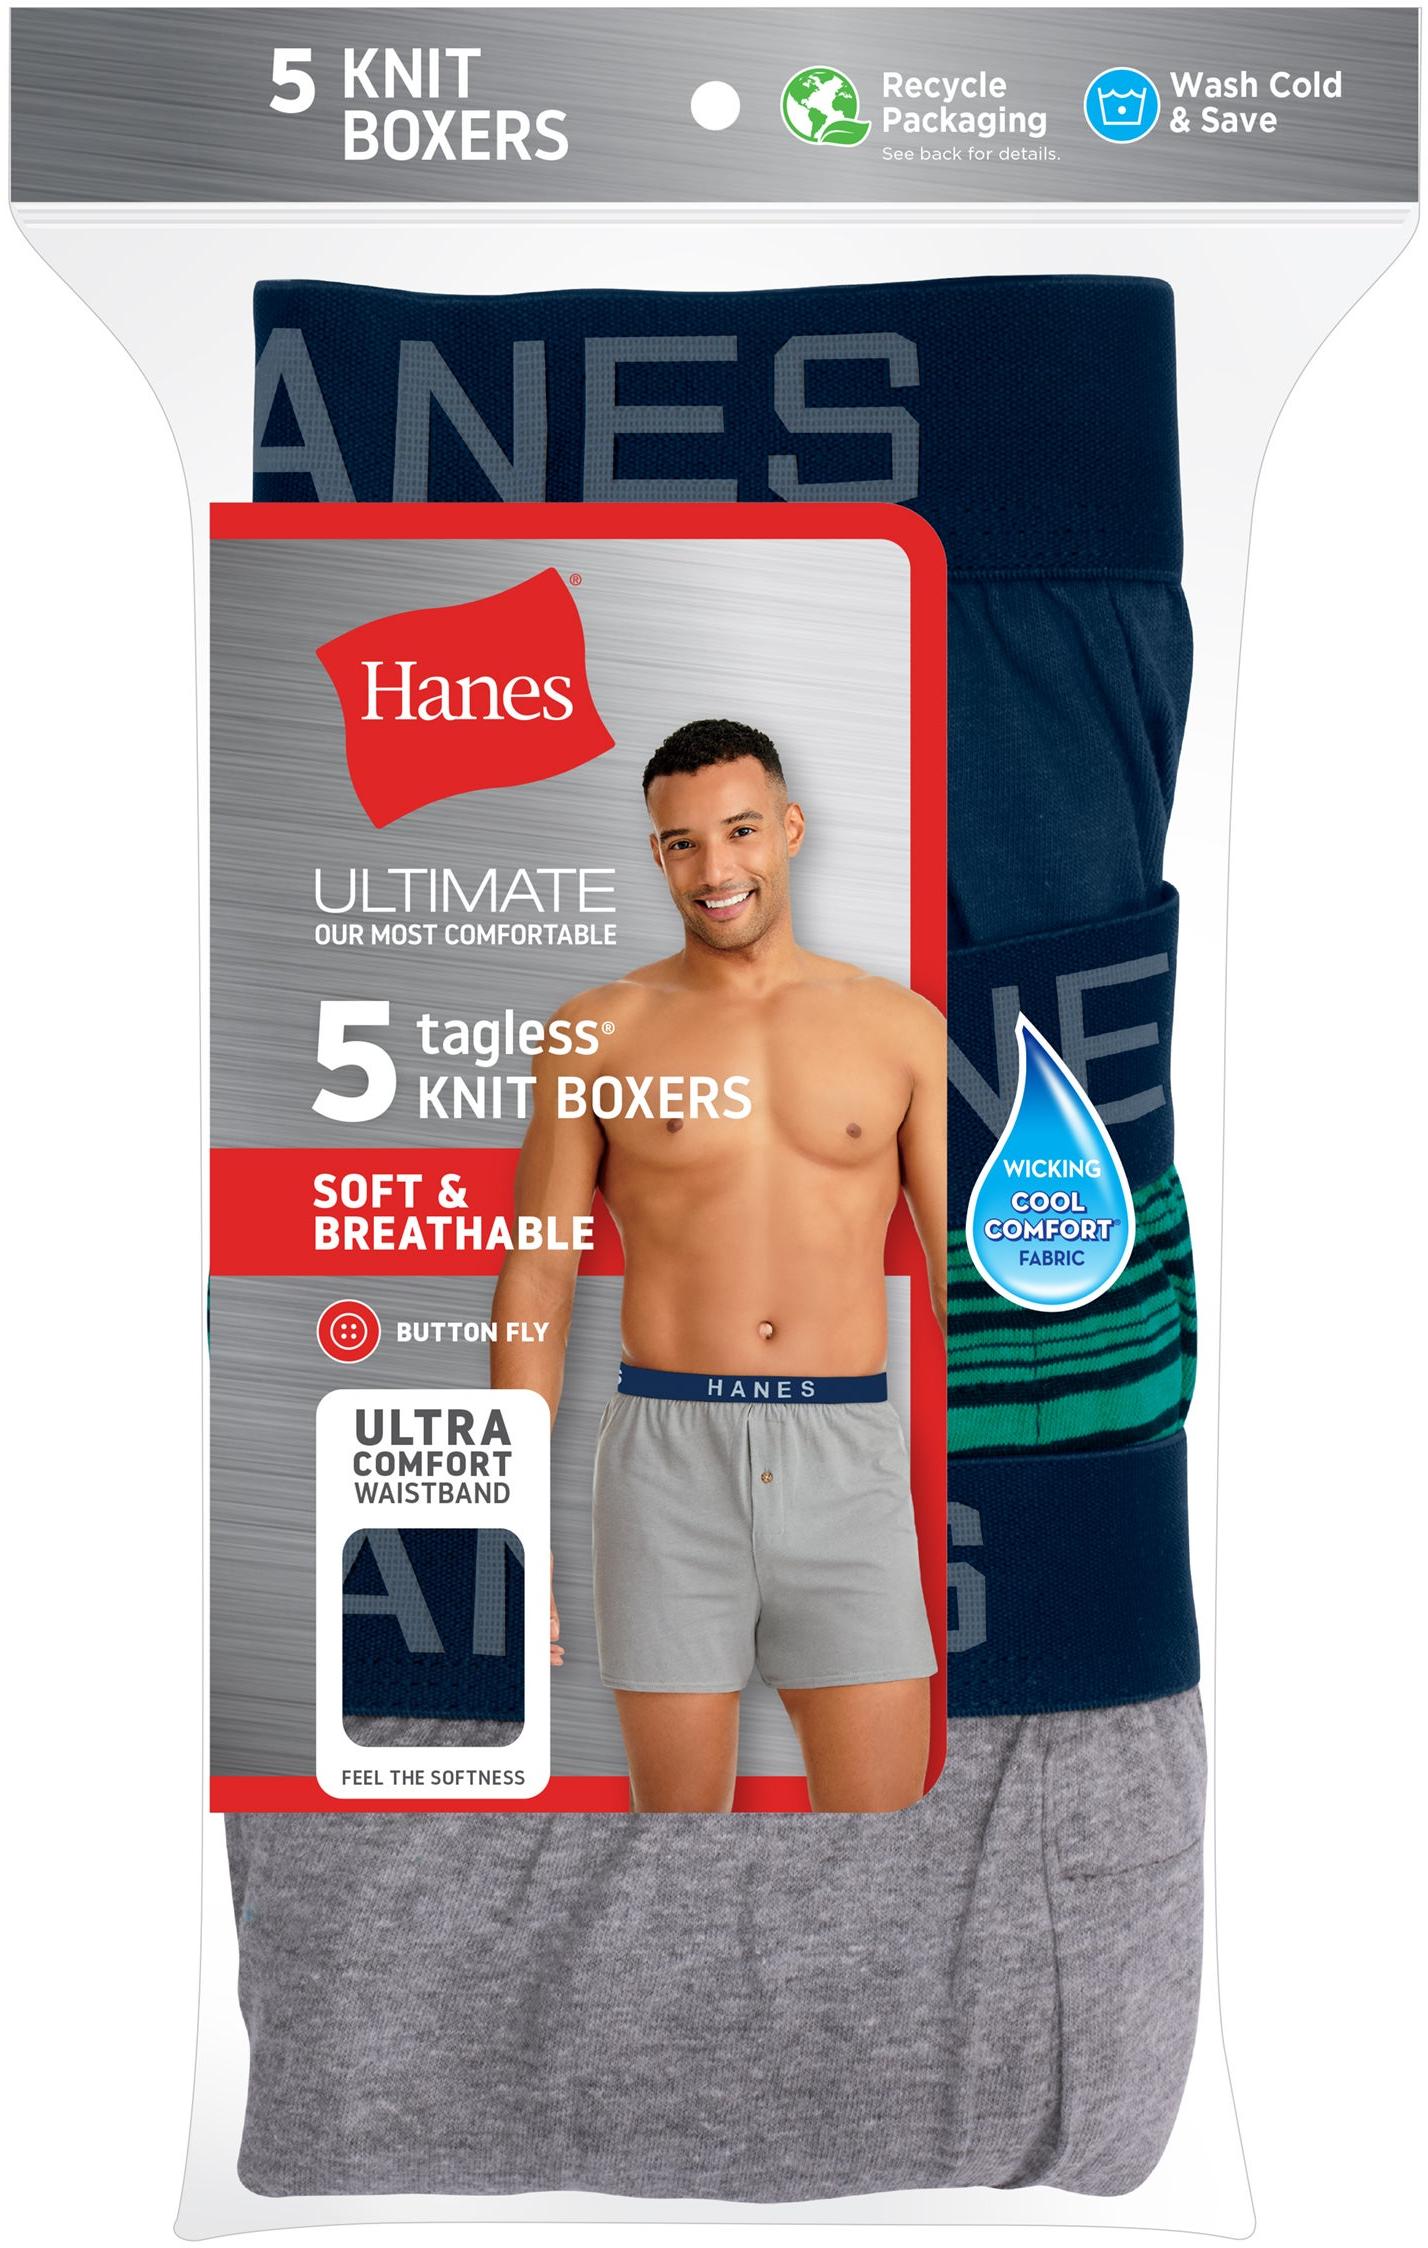 Hanes Ultimate Classics Full Cut Brief 100% Cotton 3 Pack White X-Large  40-42